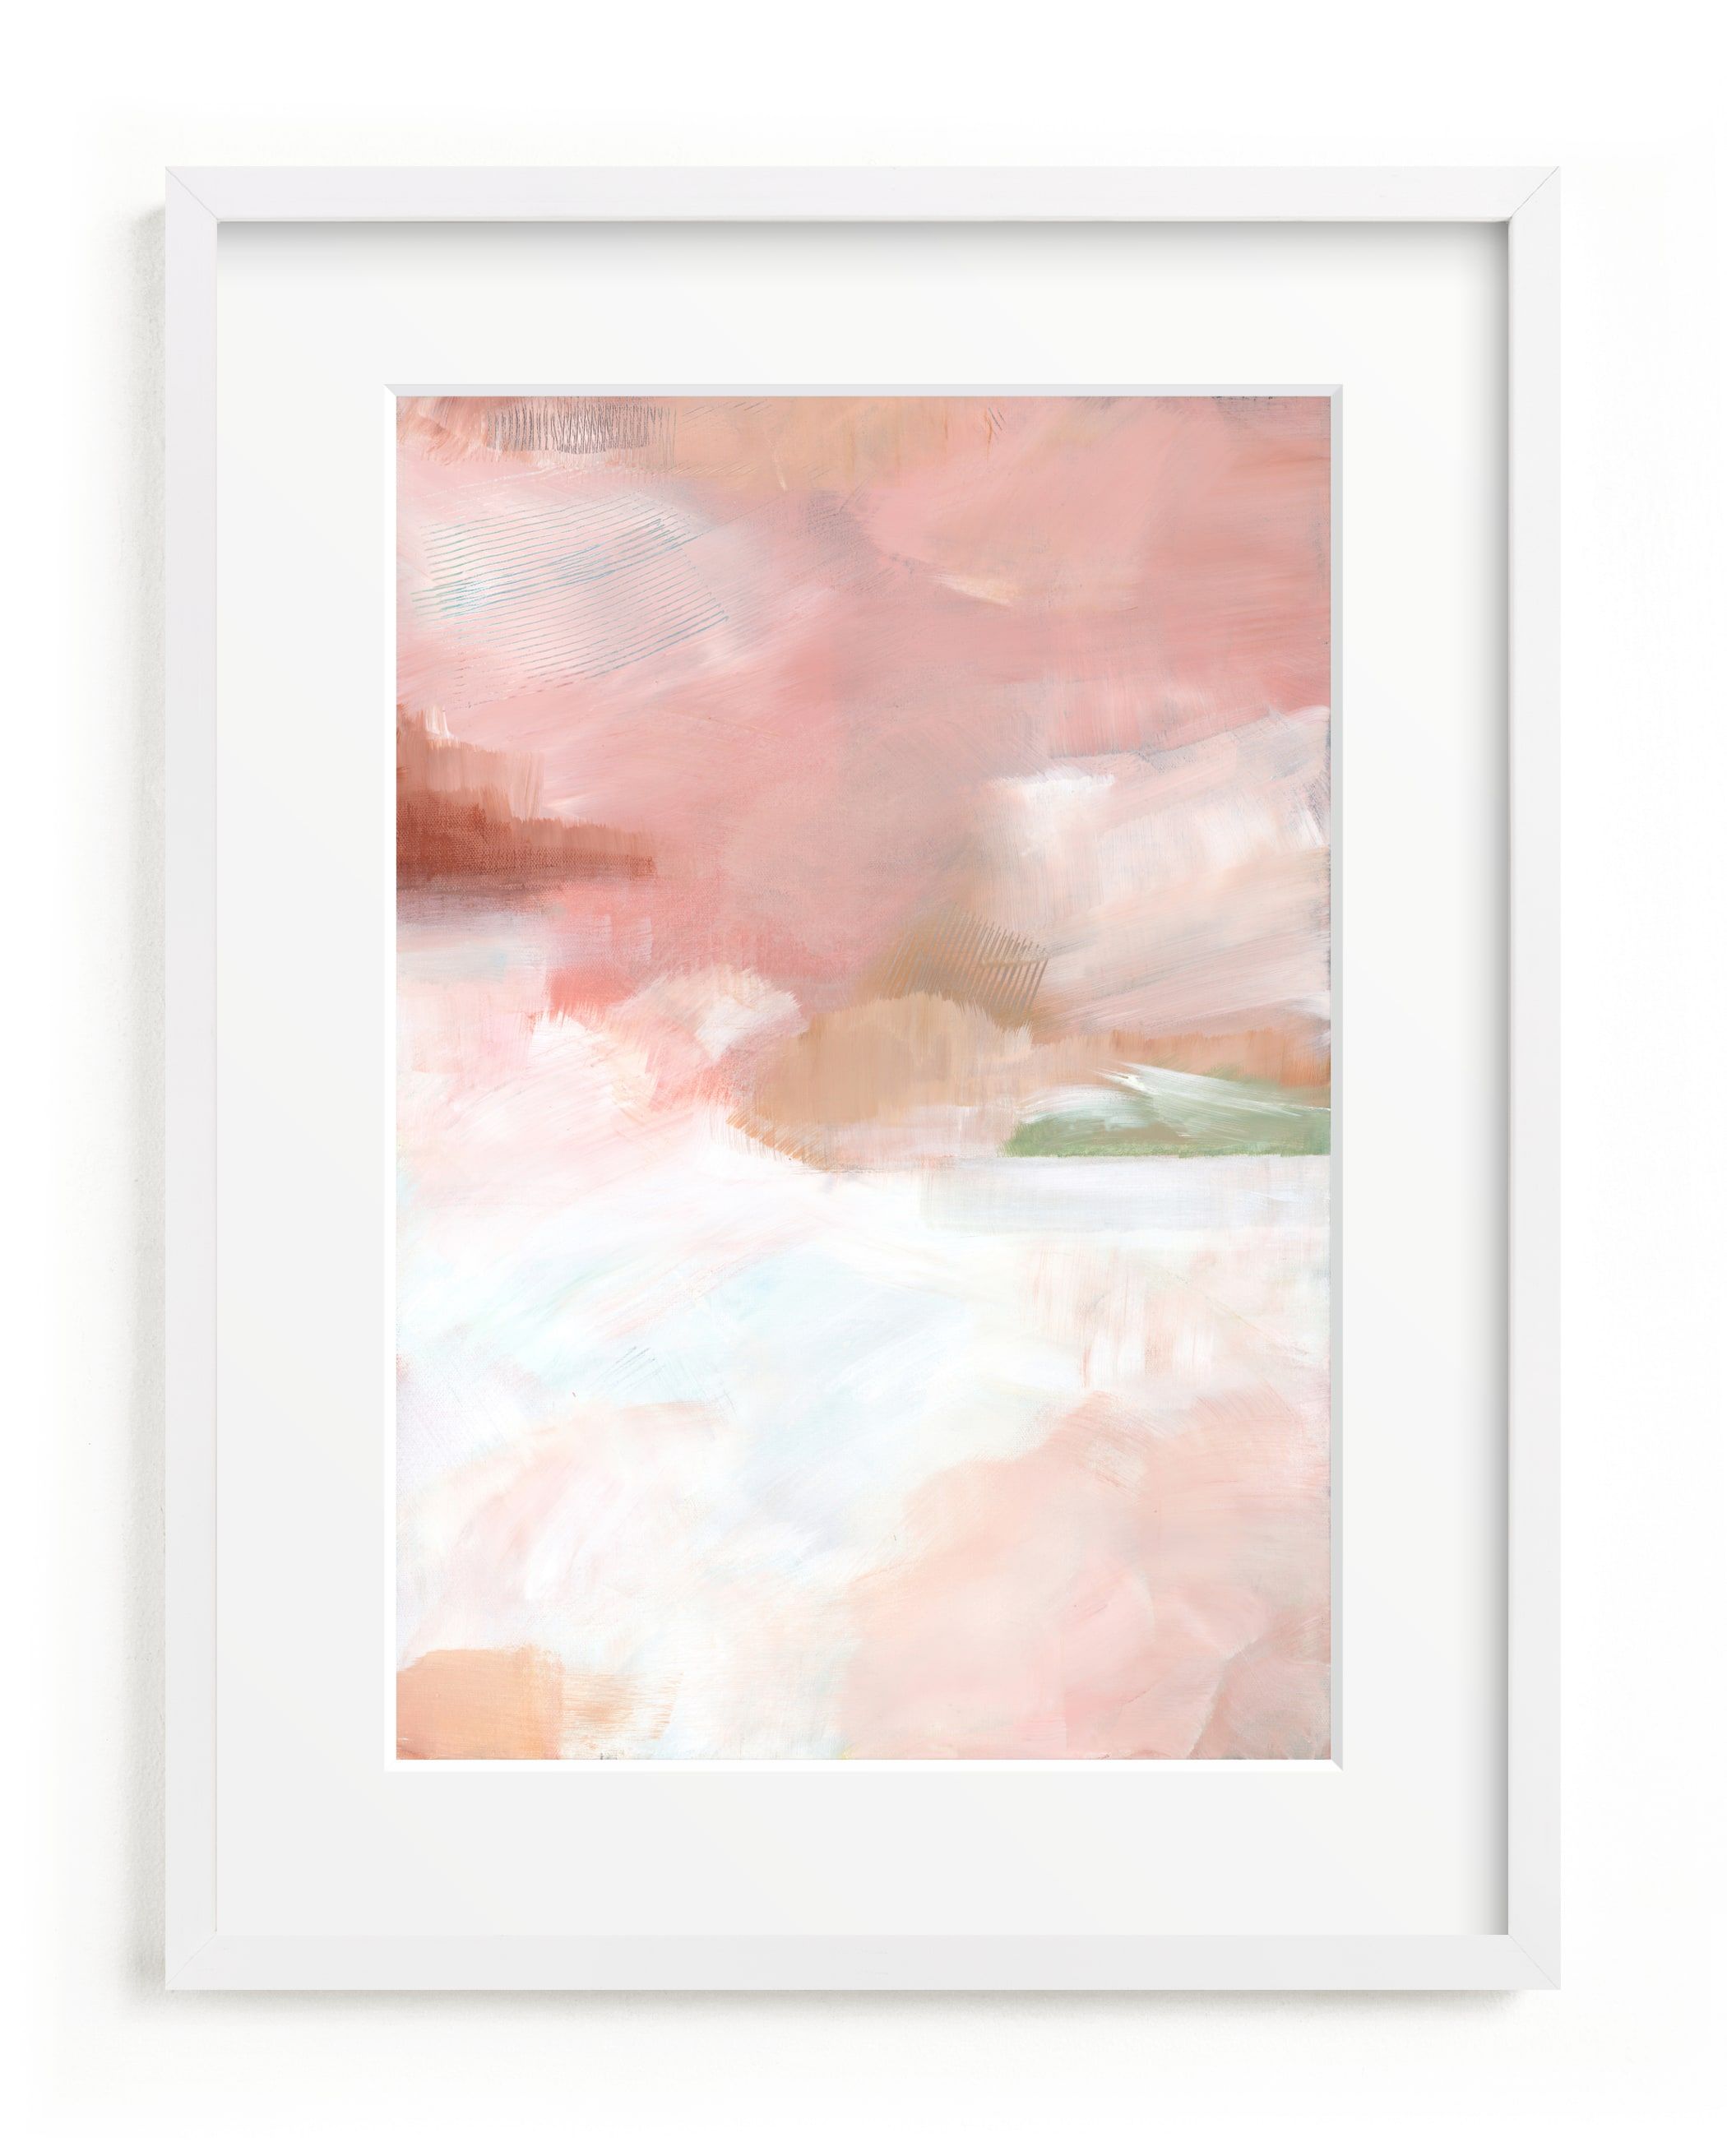 "Sorento ll" - Painting Limited Edition Art Print by AlisonJerry. | Minted